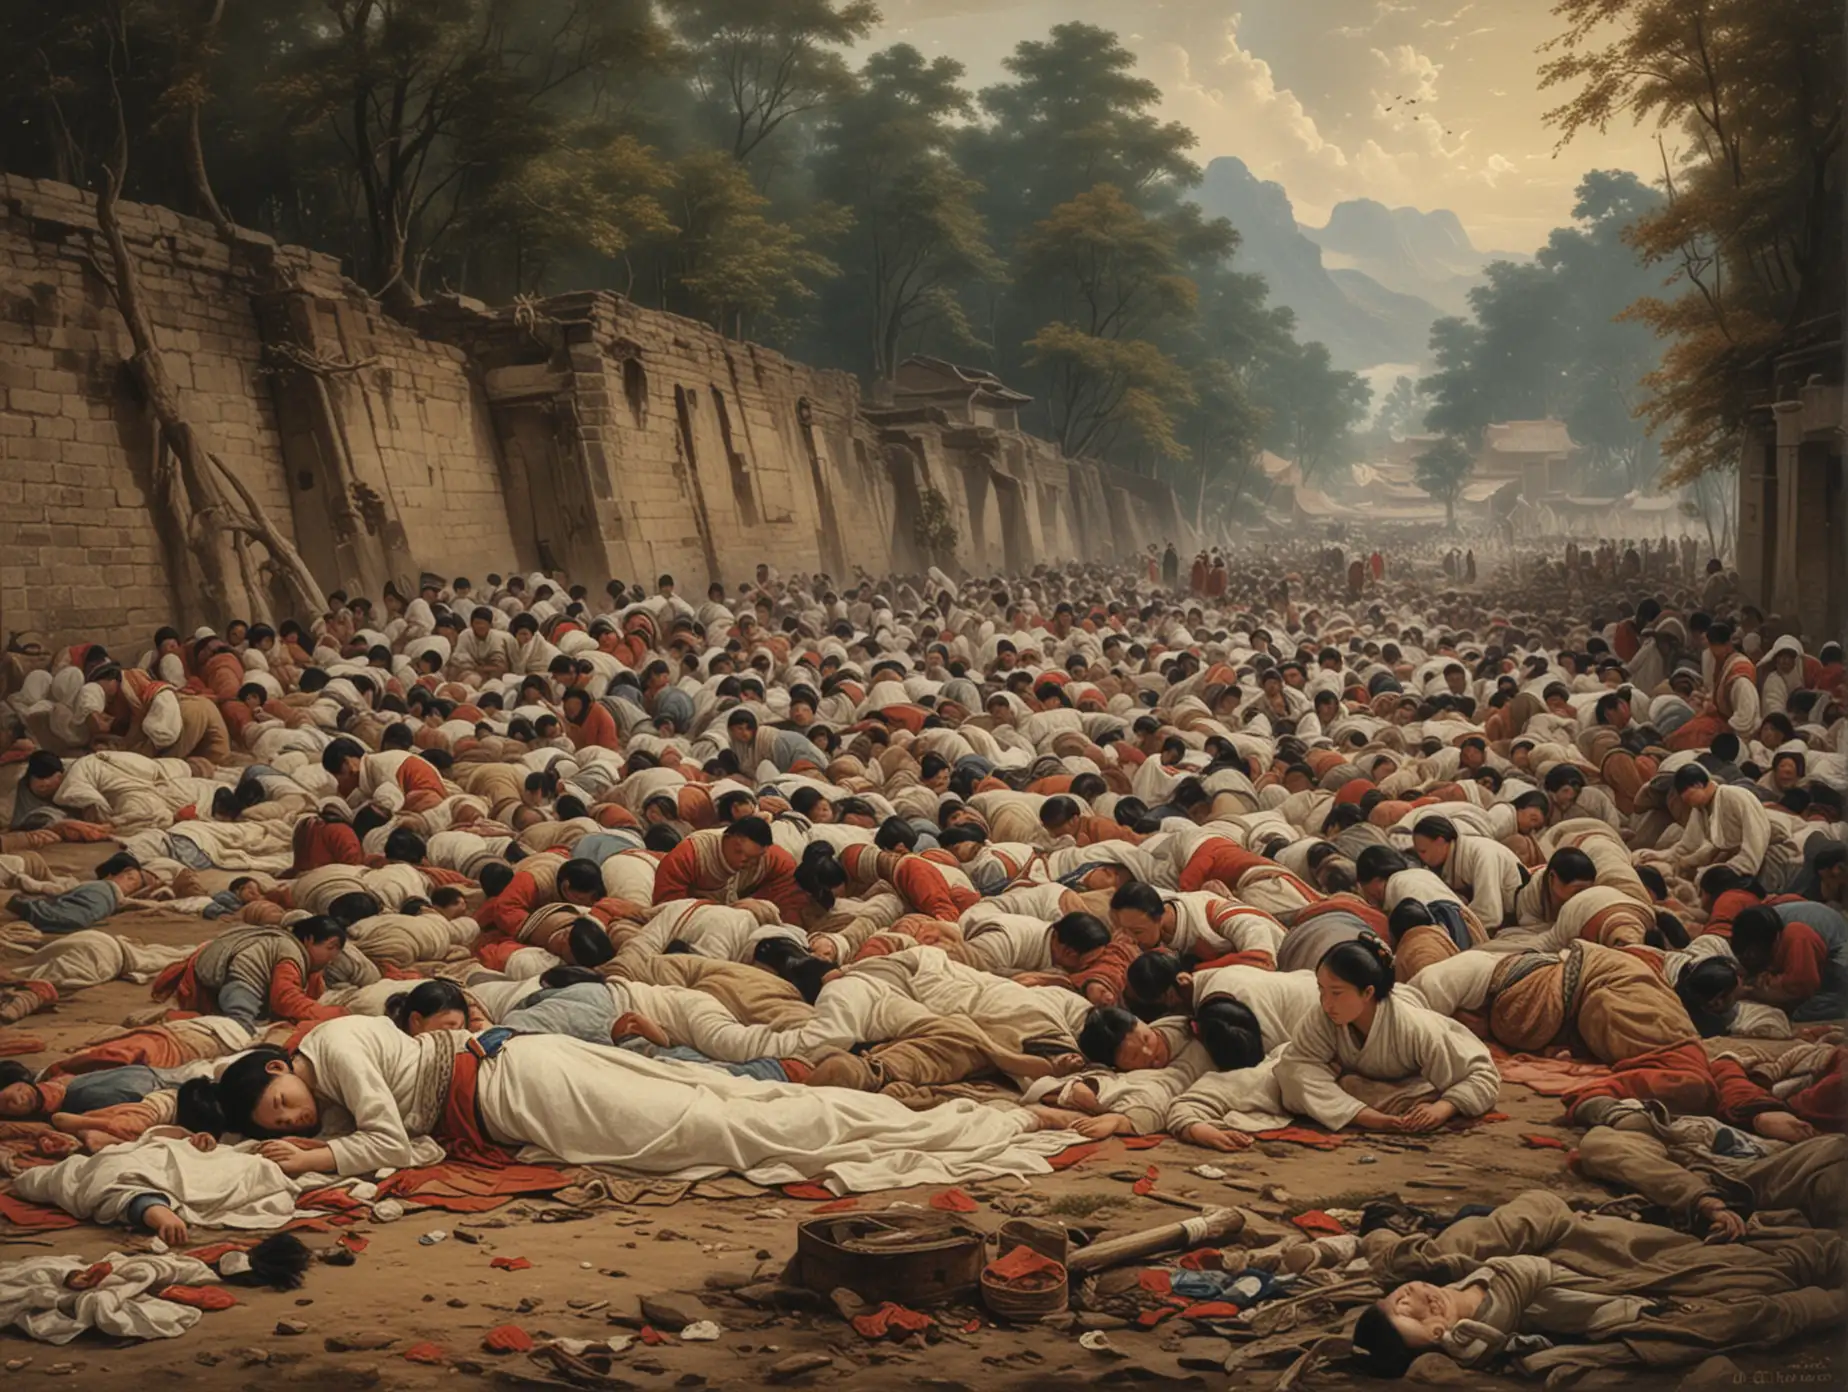 Fall-of-Anqing-Women-and-Infants-Amidst-Massacre-in-Taiping-Heavenly-Kingdom-1862